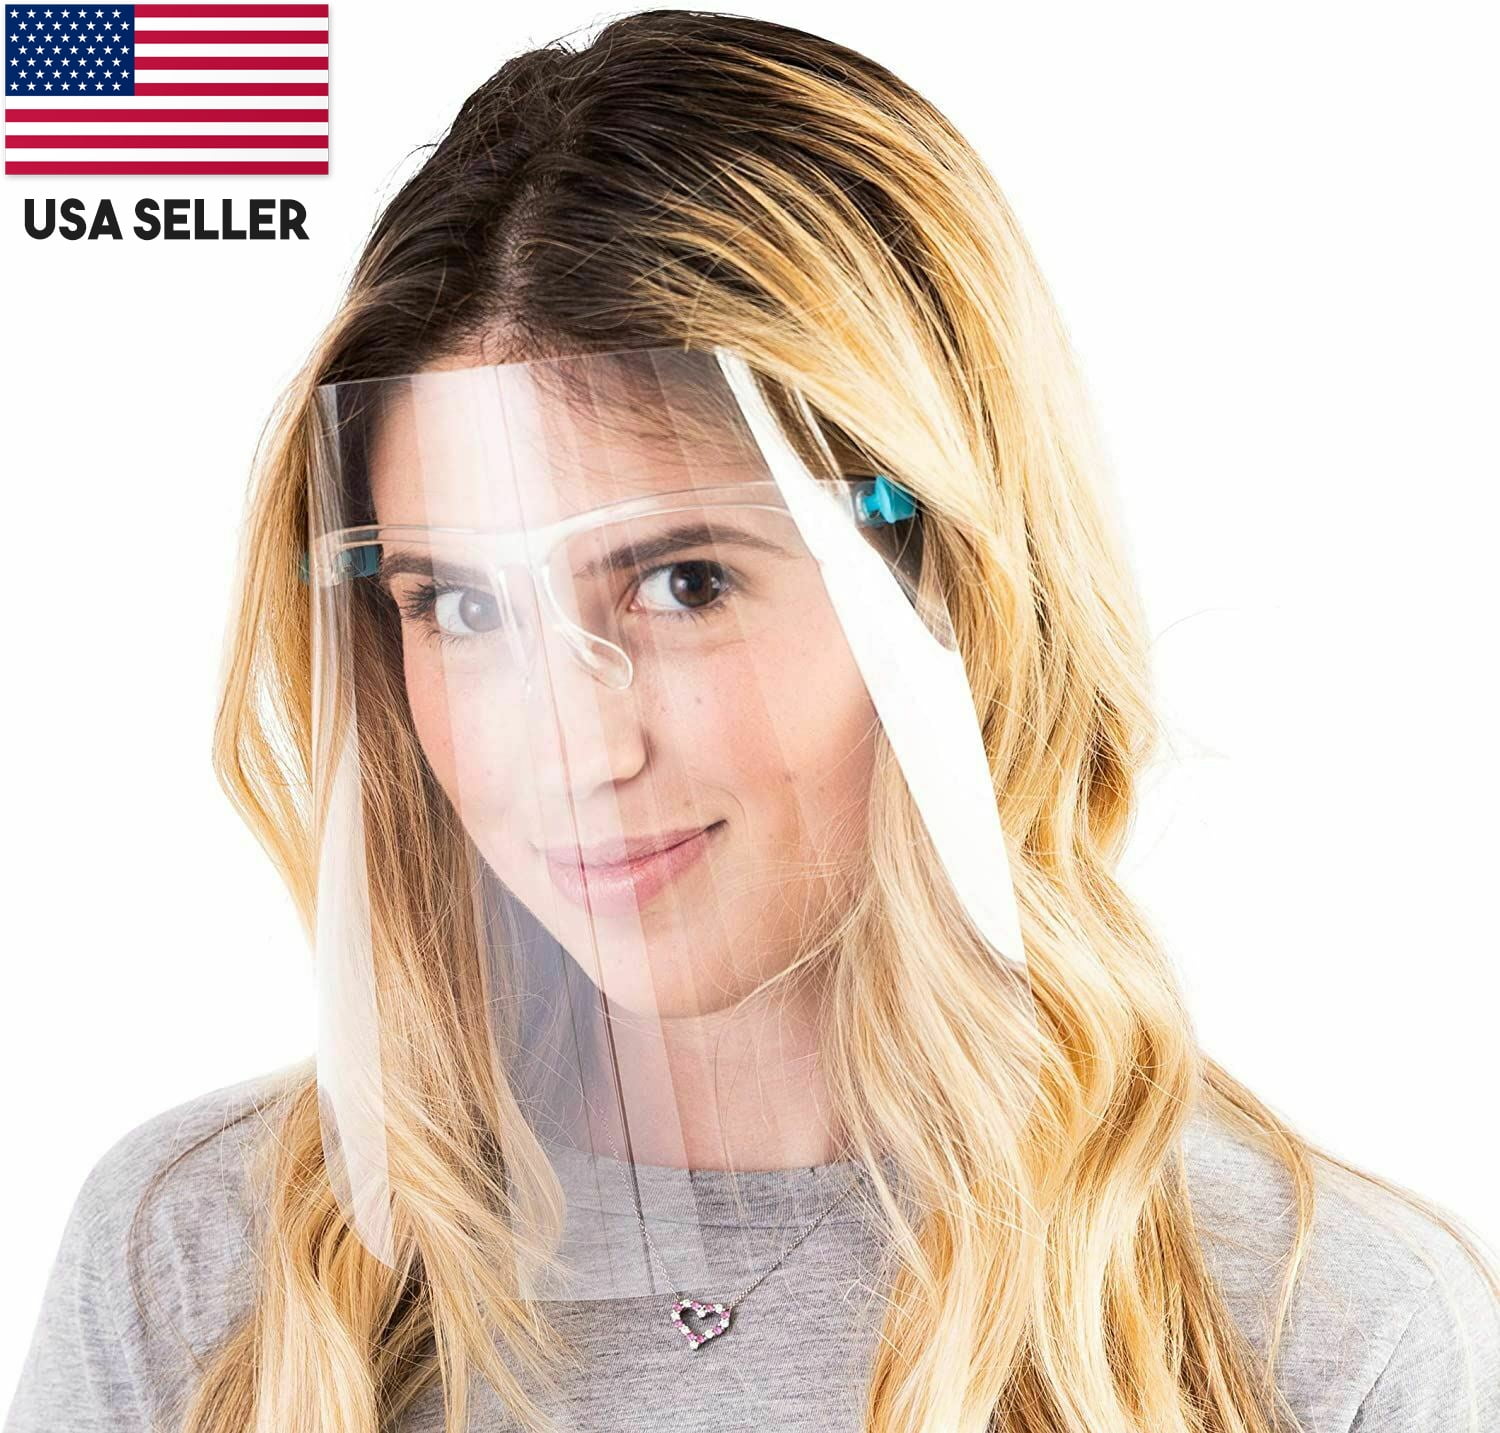 3 PCS Clear Face Shield Face Mask Protector Reusable Transparent Mask Cover USA